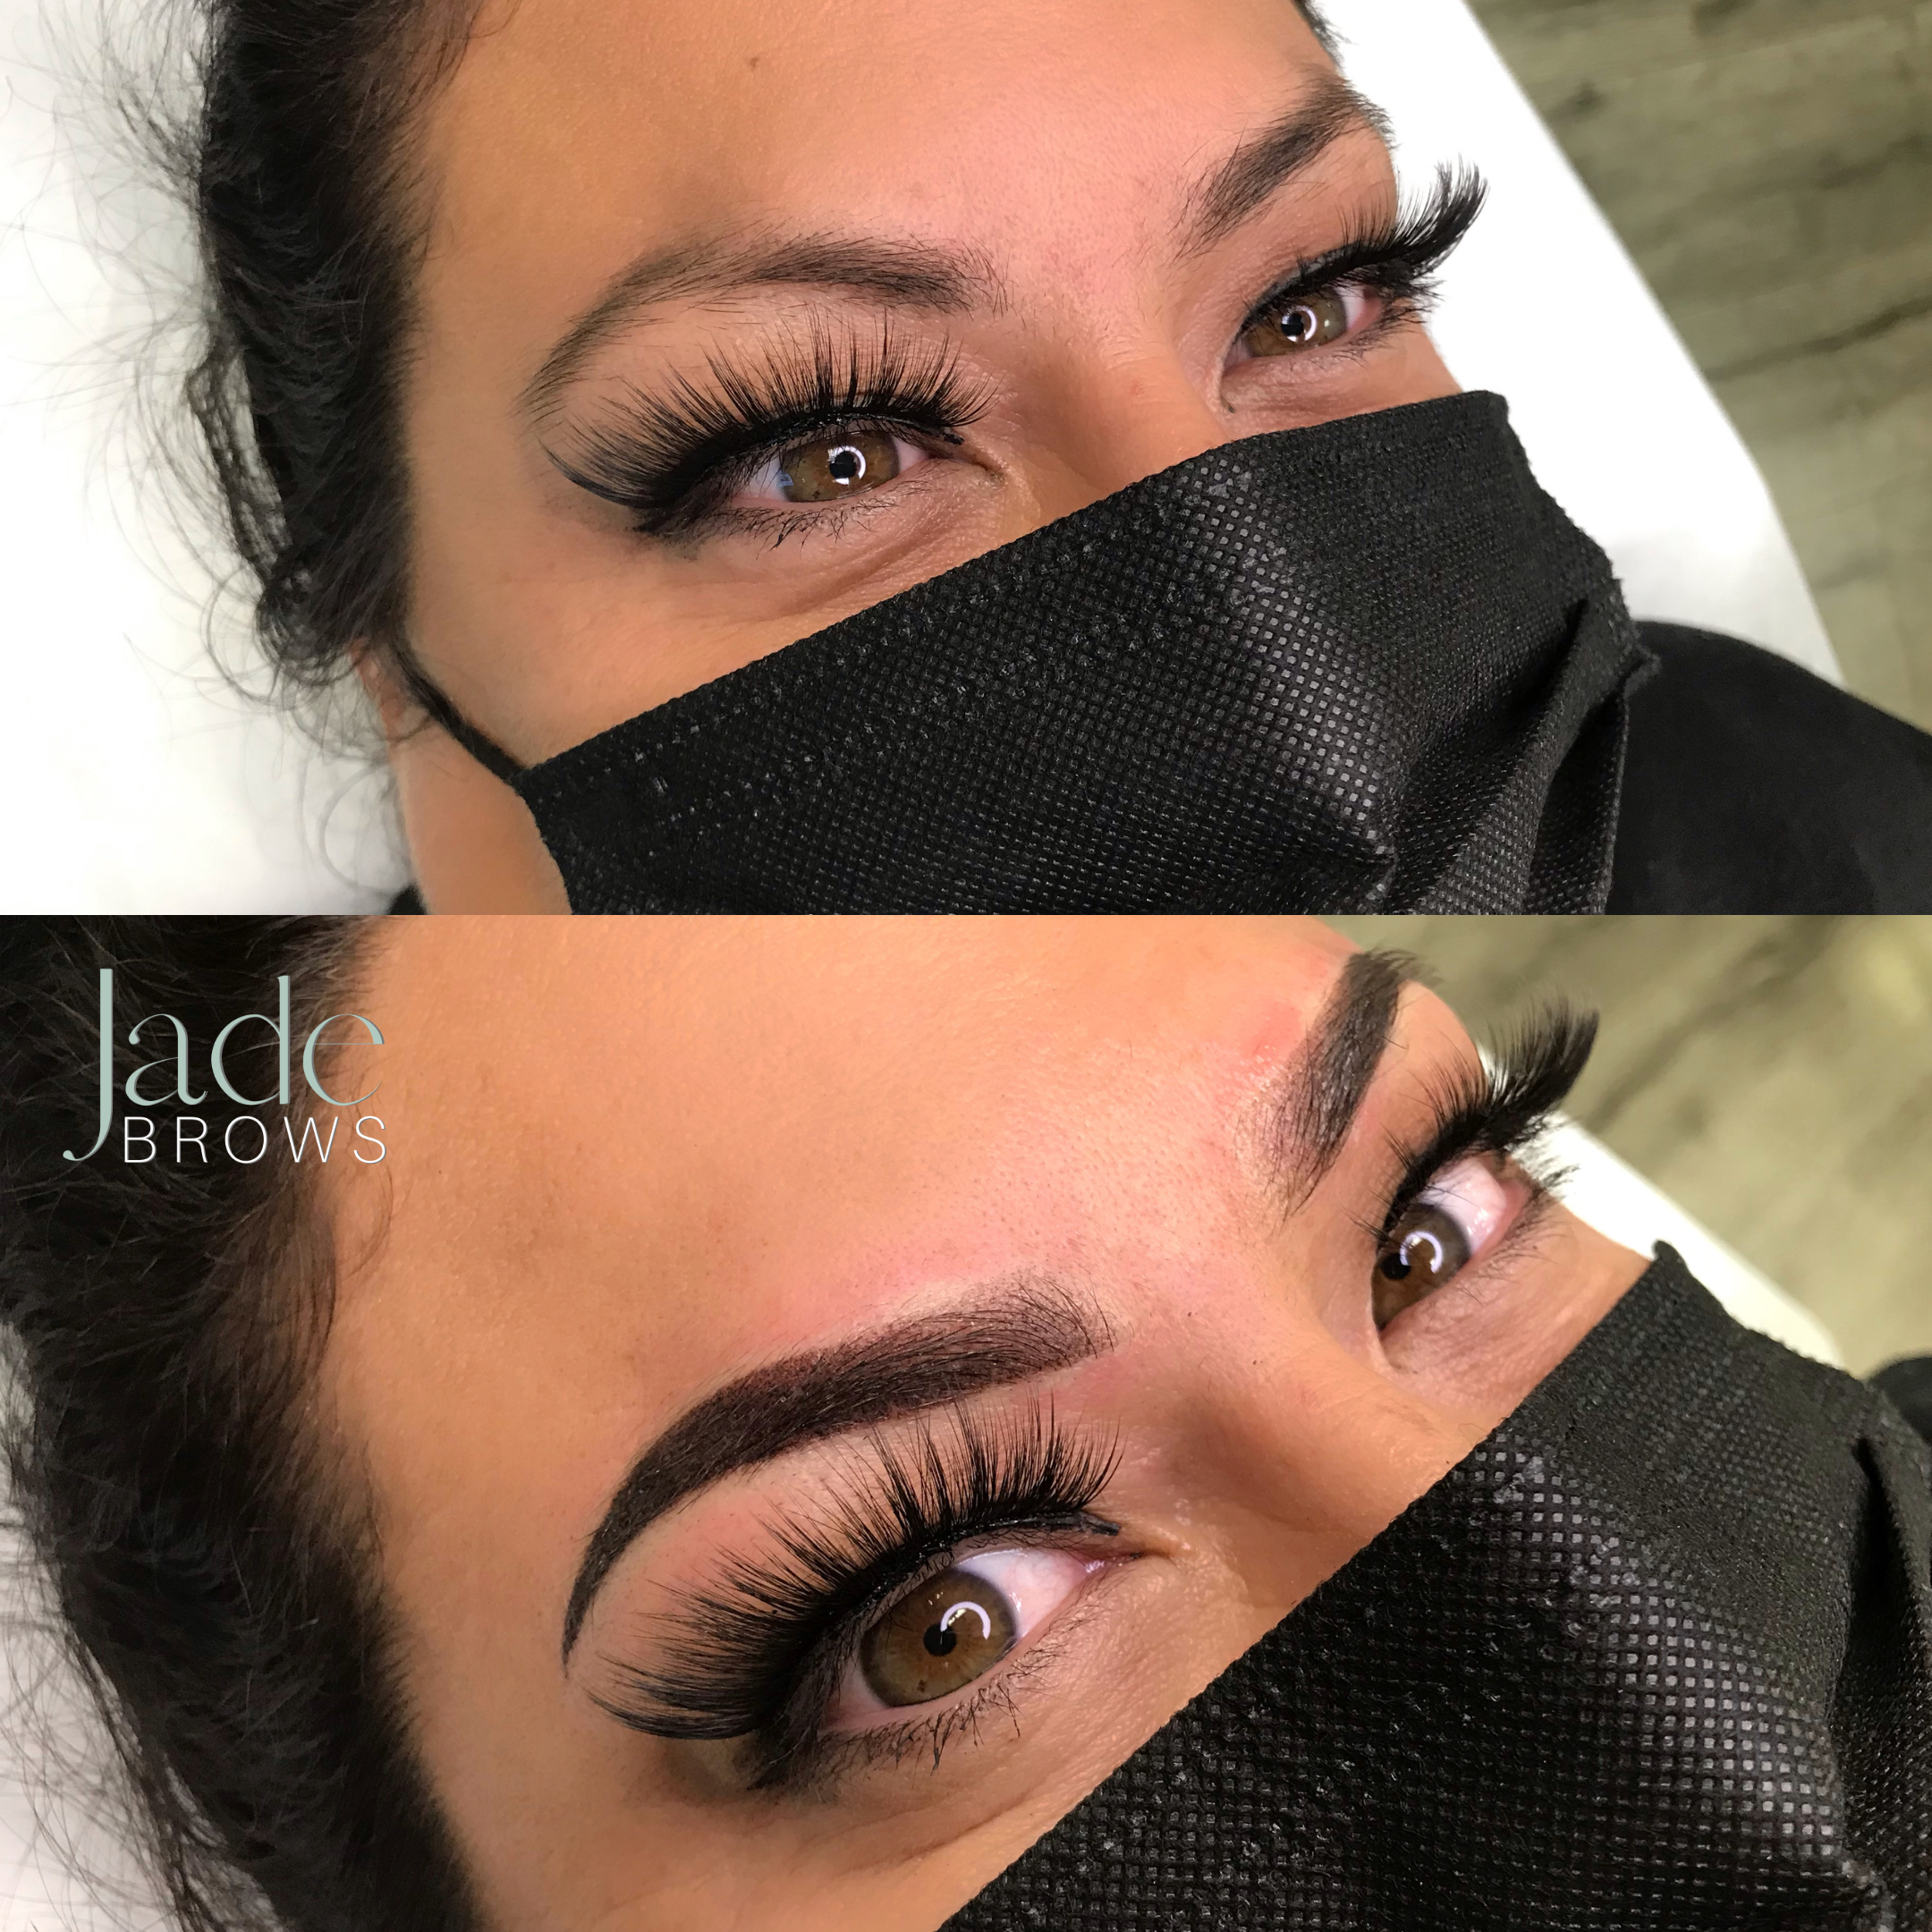 𝐍𝐞𝐰 𝐎𝐦𝐛𝐫𝐞 𝐁𝐫𝐨𝐰𝐬⠀- High Arch — Jade Brows